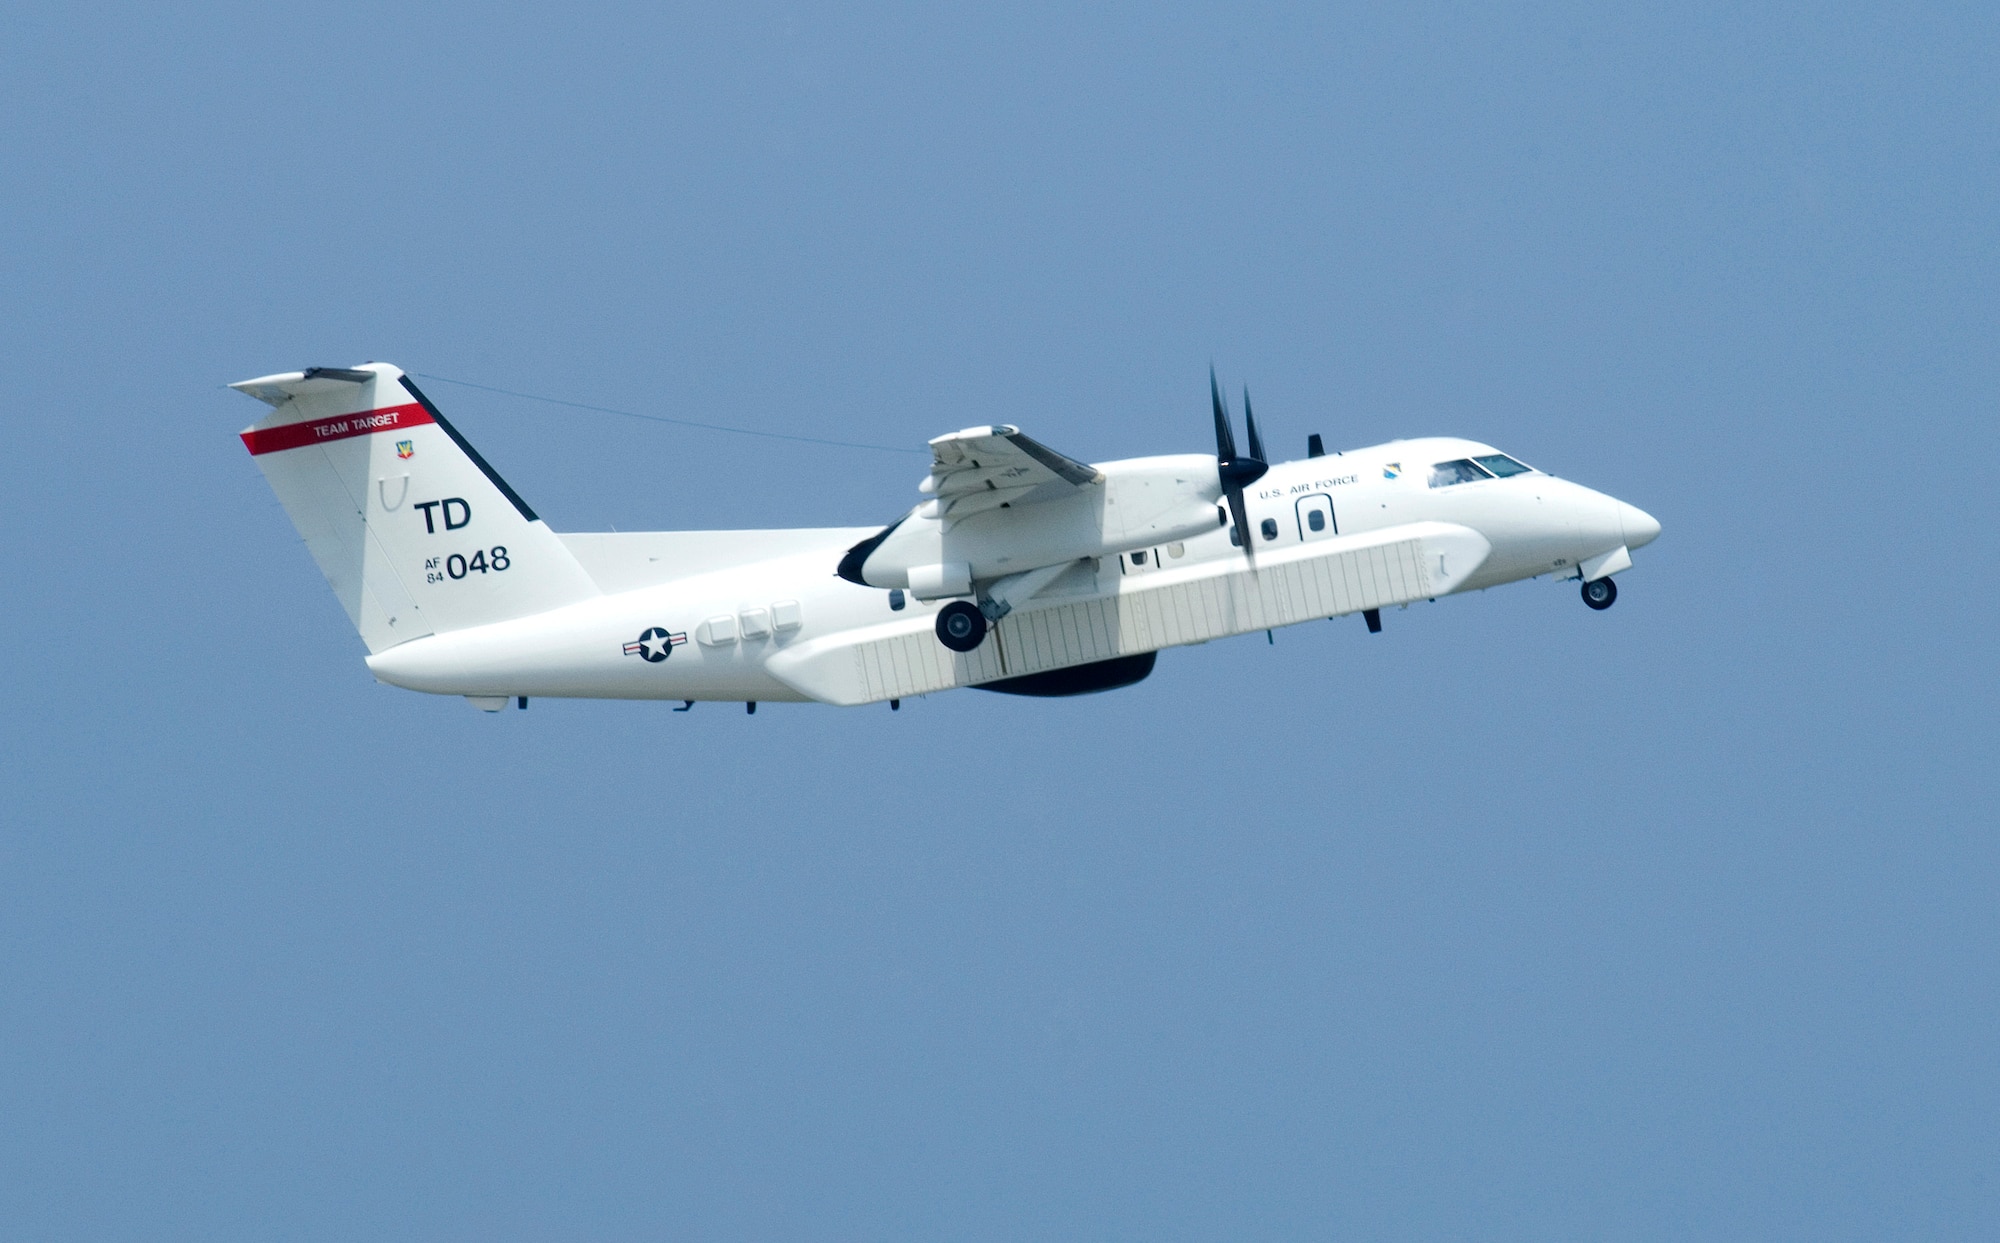 An E-9A takes off from Tyndall Air Force Base, Fla. during a Combat Archer training exercise. The E-9 is used as a surveillance platform over the Gulf of Mexico waters providing telemetry and radio relays in support of air-to-air weapons systems evaluations.(U.S. Air Force photo/Staff Sgt. Bennie J. Davis III)